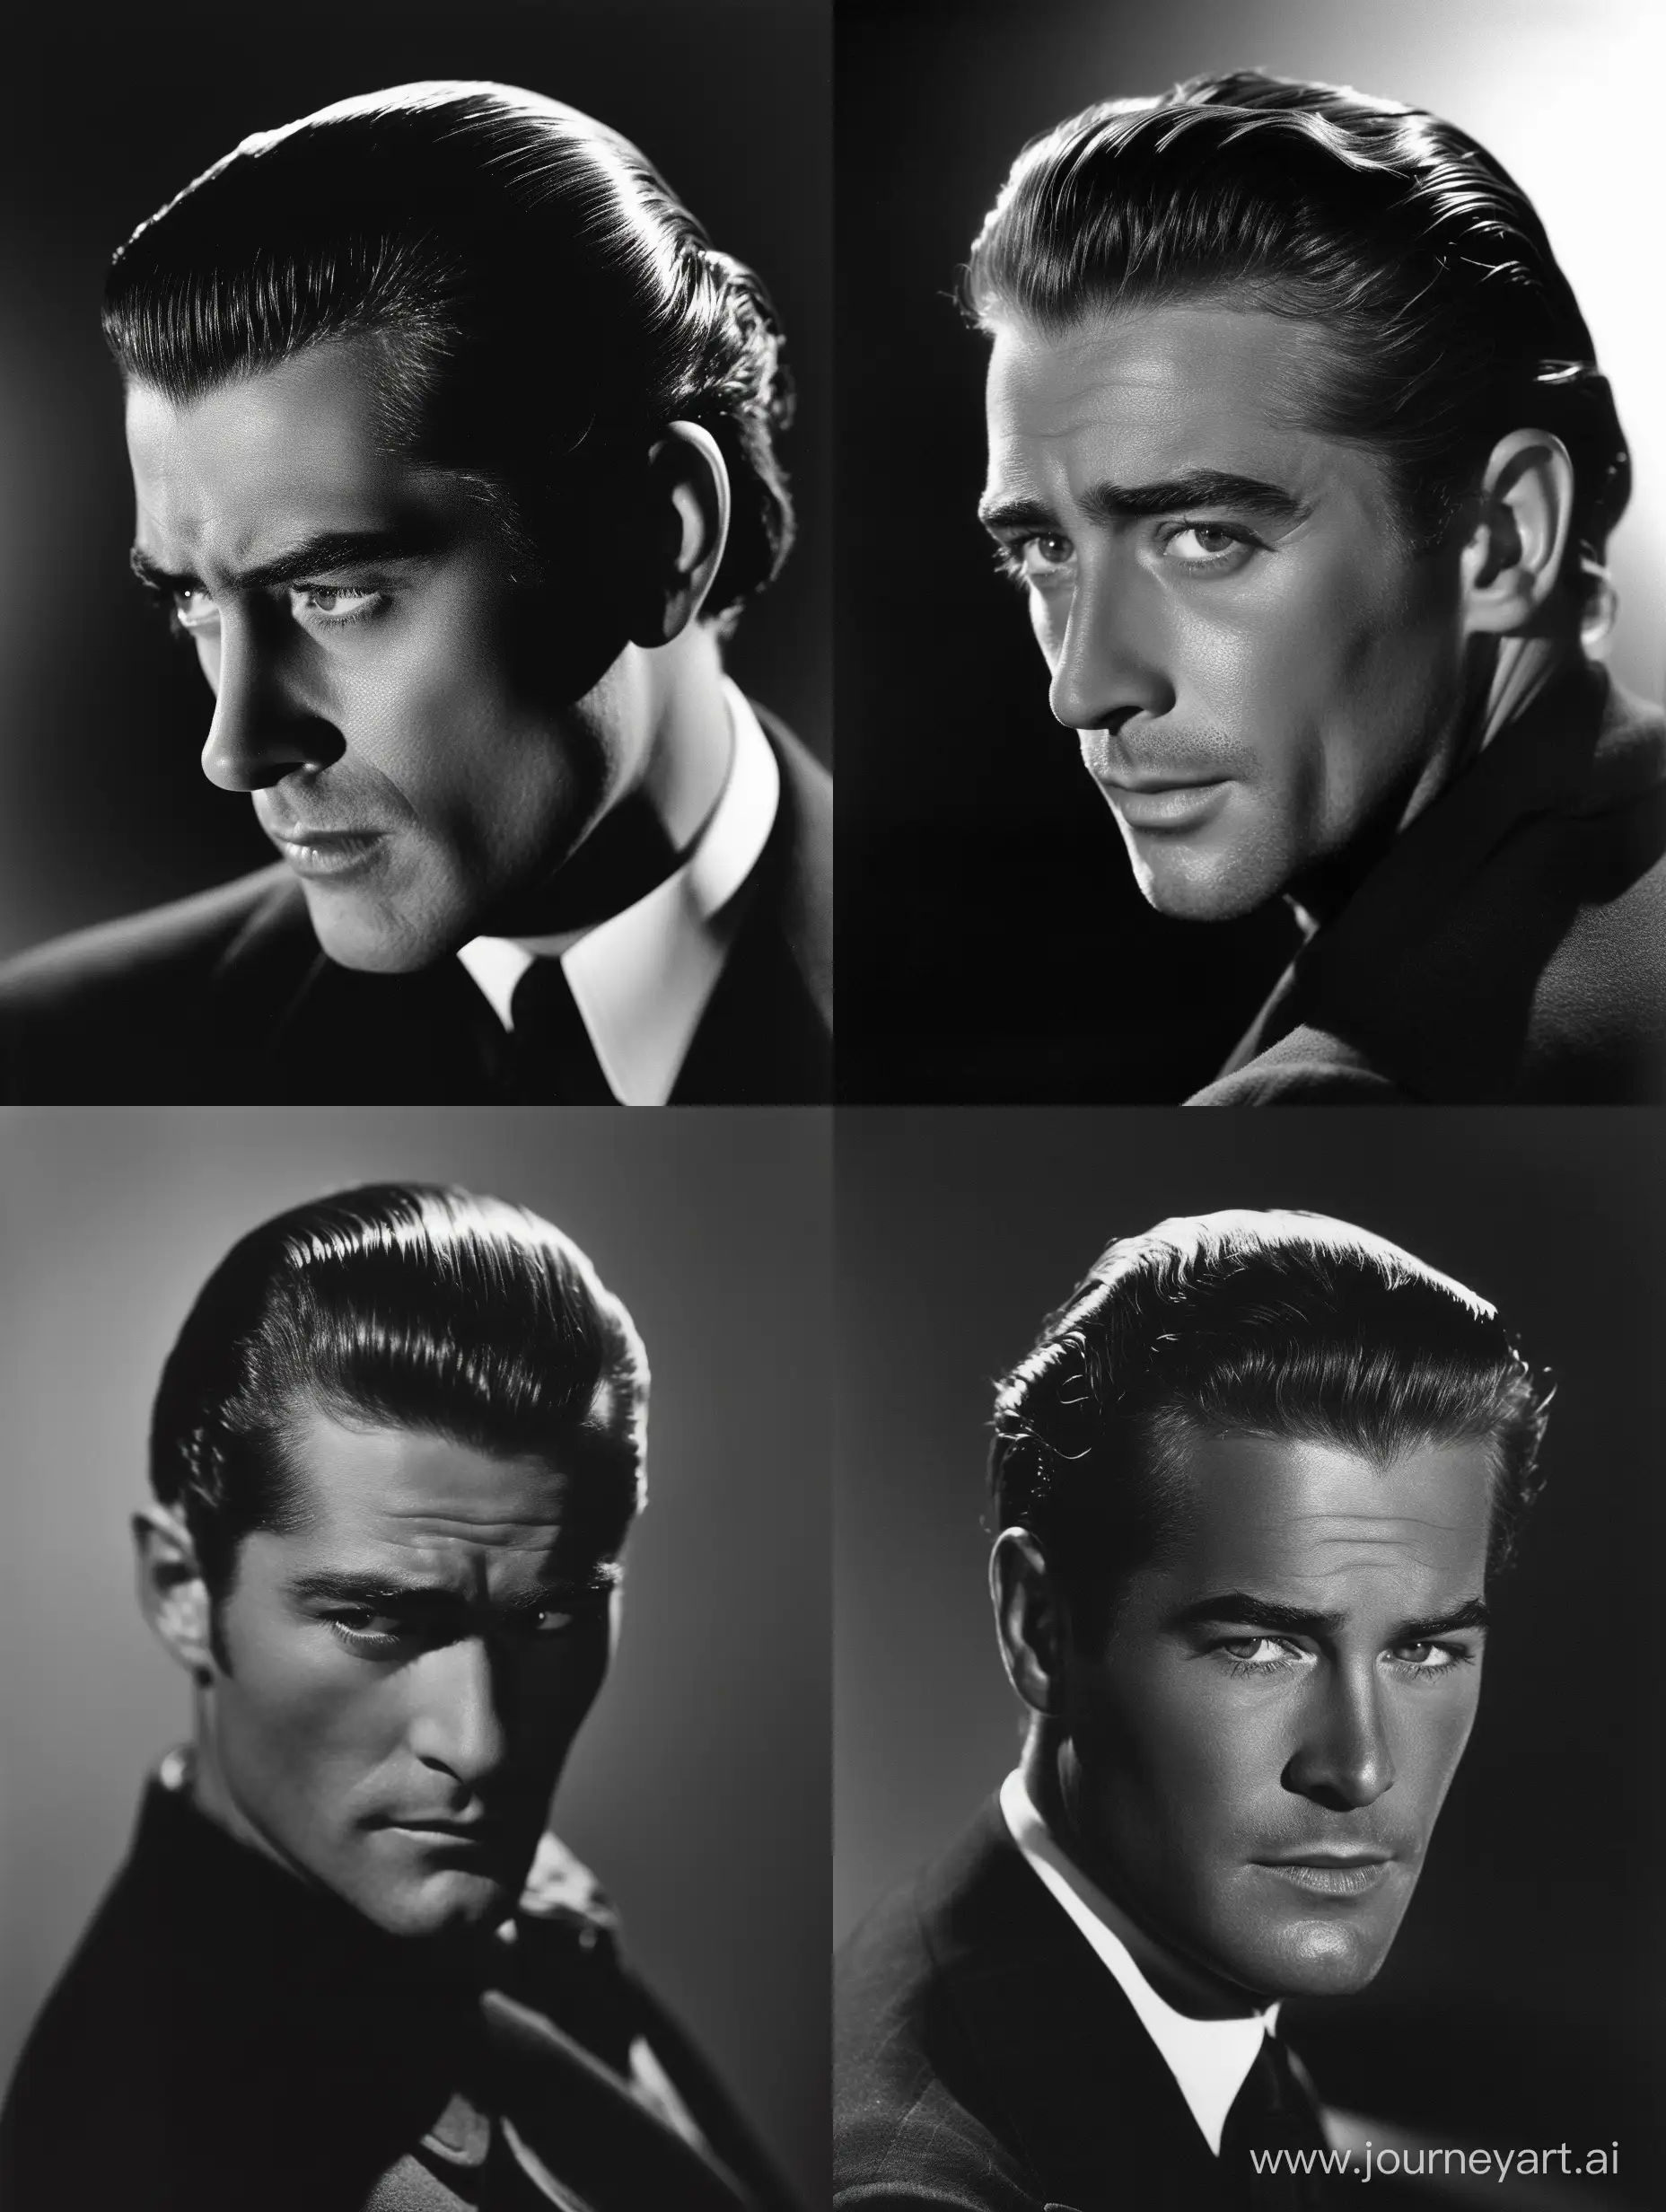 Noir shot of Glamorous 1940s handsome movie star man with slicked-back hair